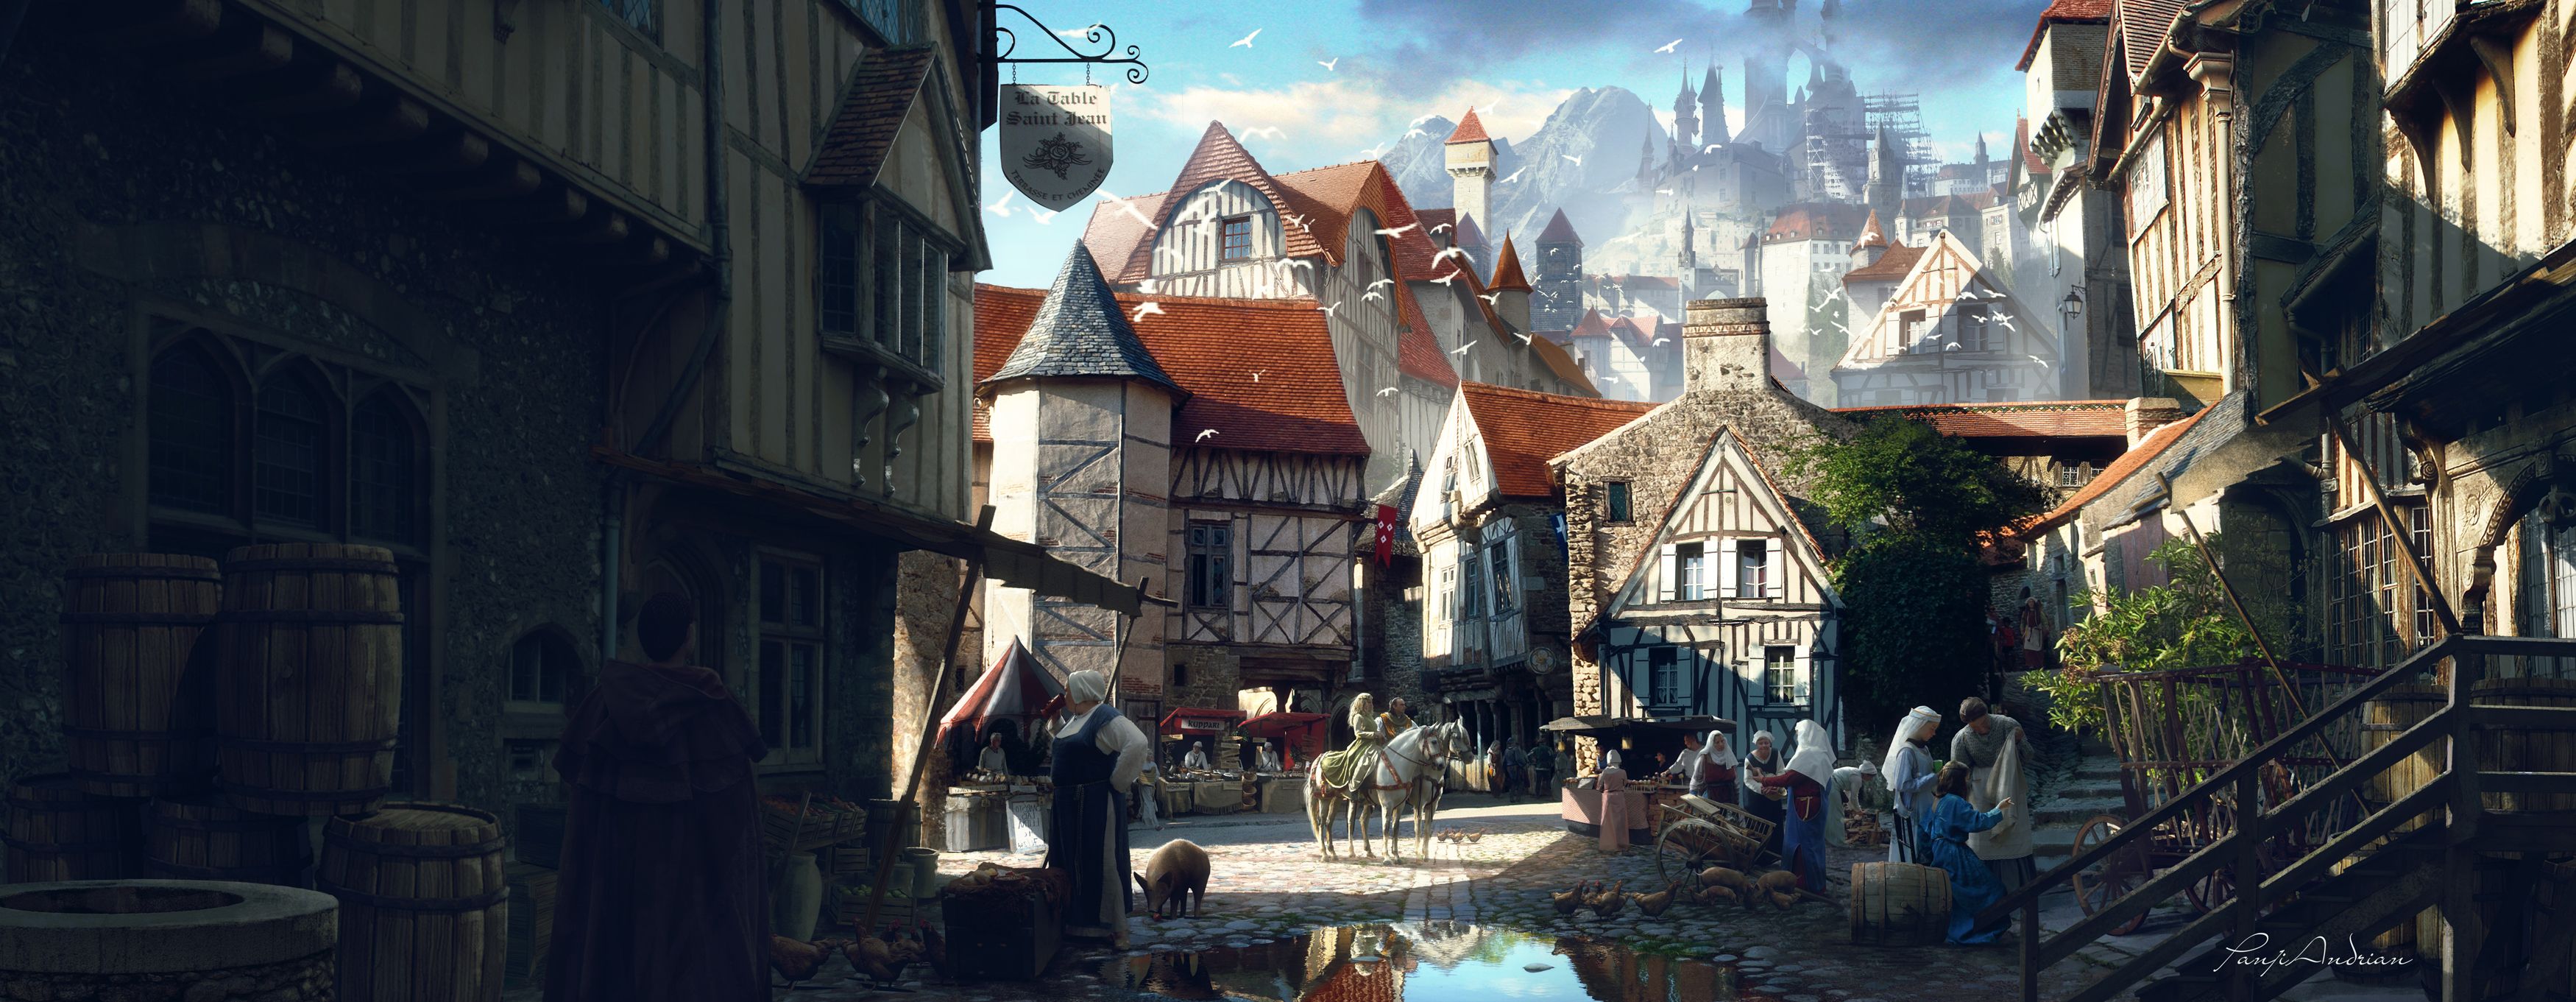 Medieval Town Wallpaper Free Medieval Town Background